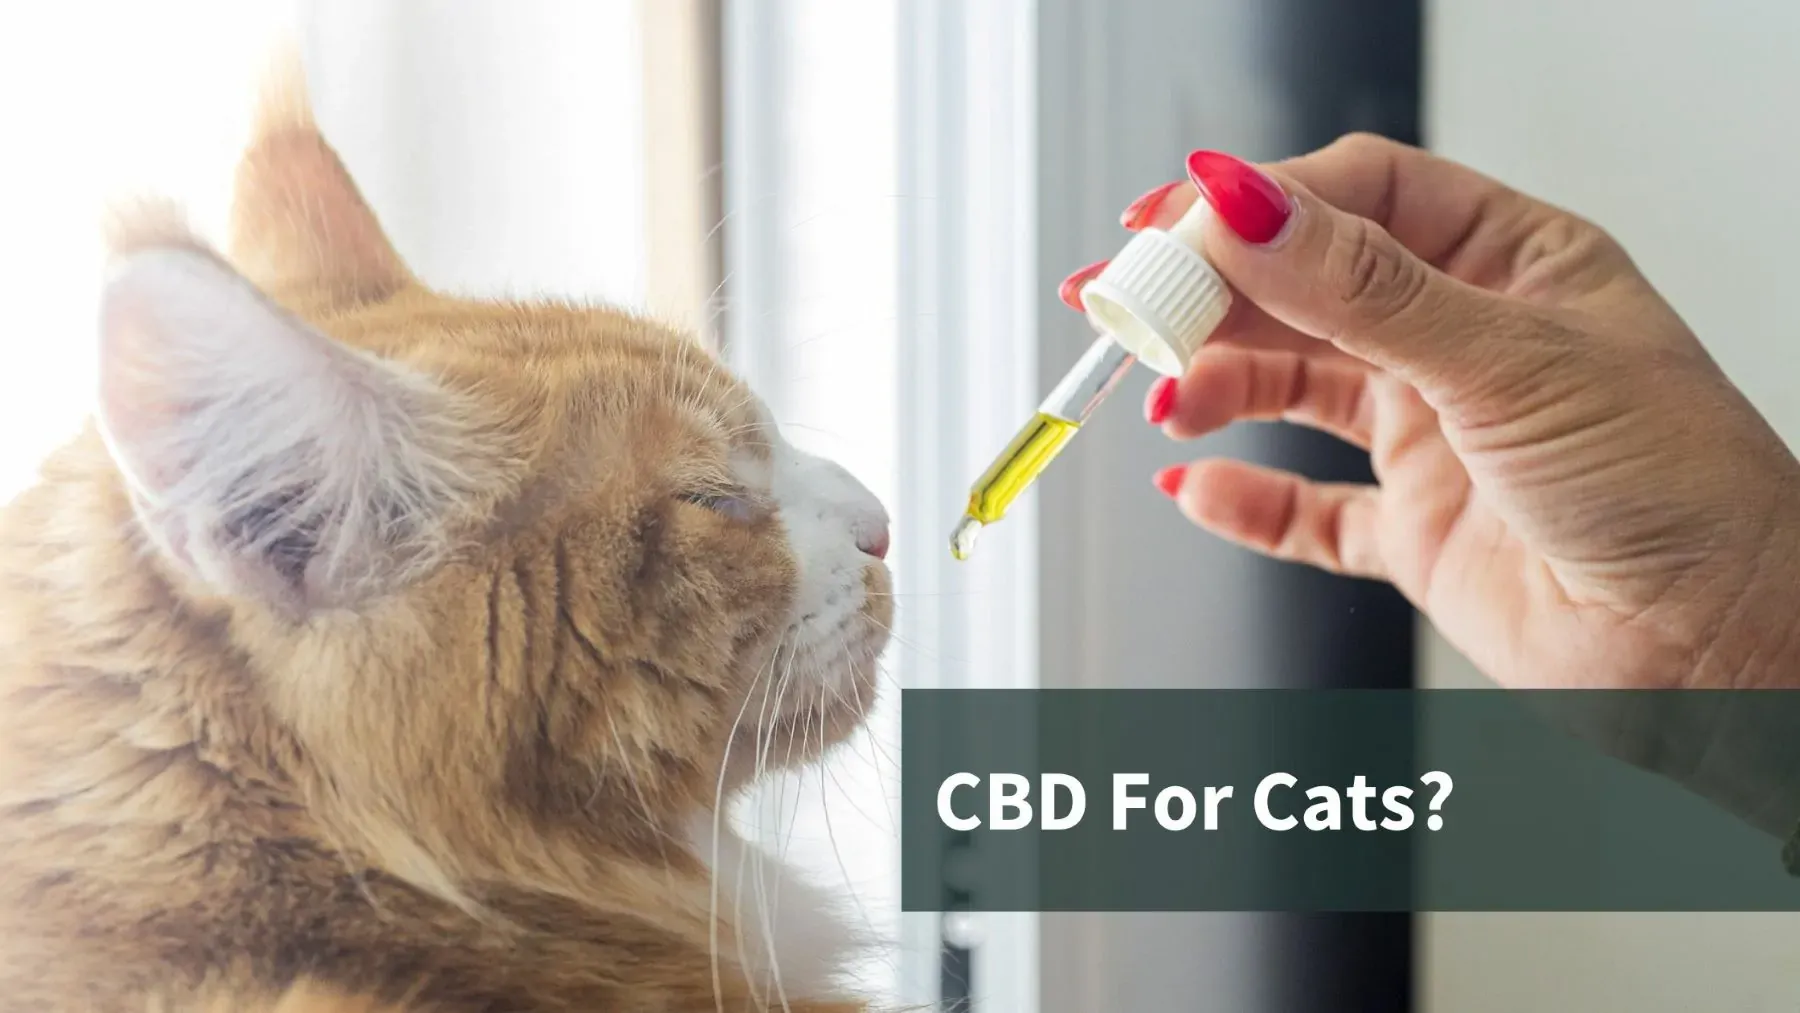 Cat taking CBD from a dropper. Text reads "CBD for Cats?"